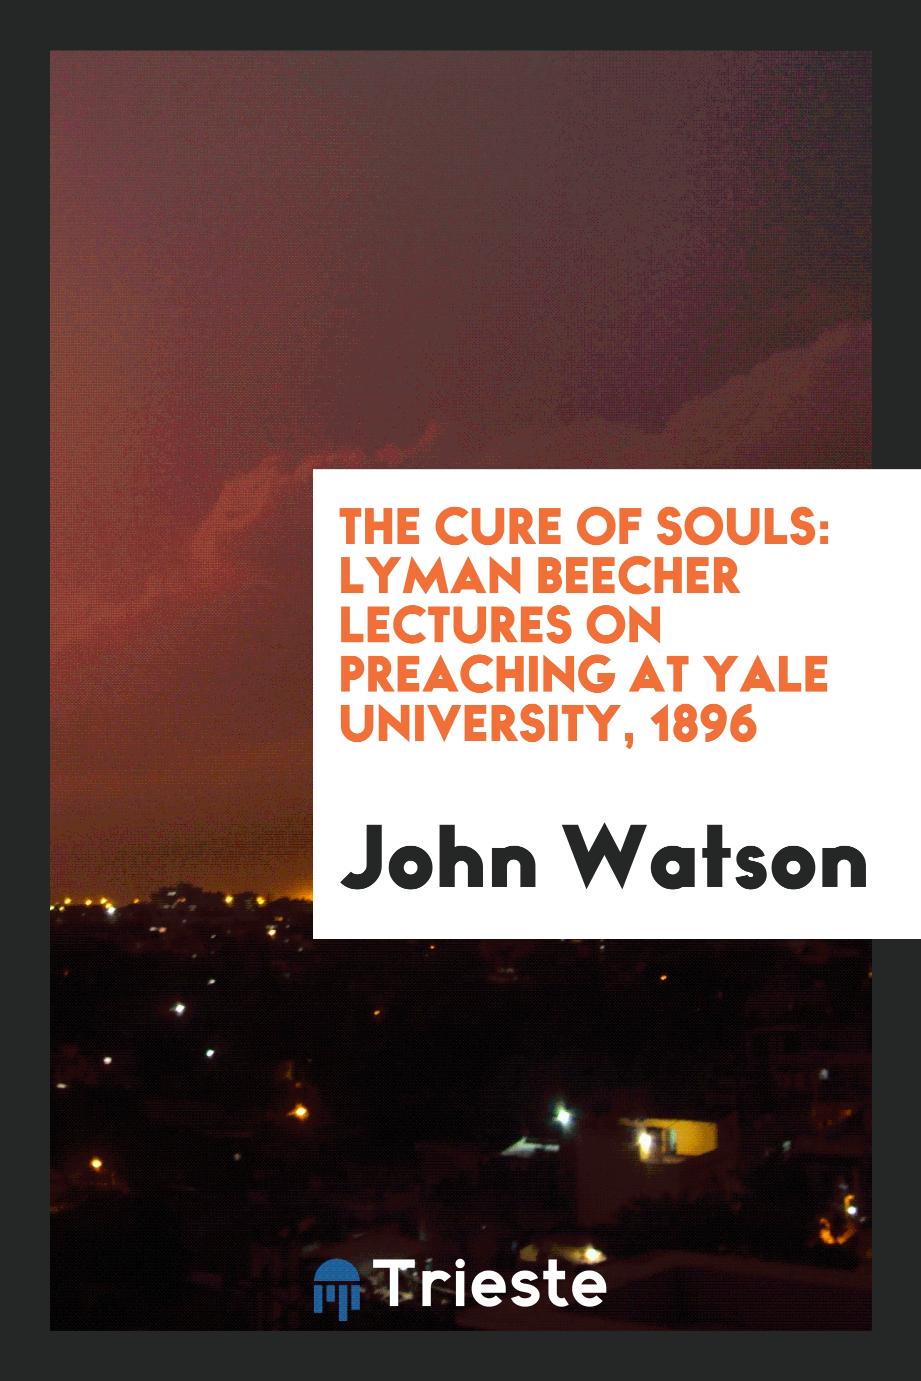 The Cure of Souls: Lyman Beecher Lectures on Preaching at Yale University, 1896